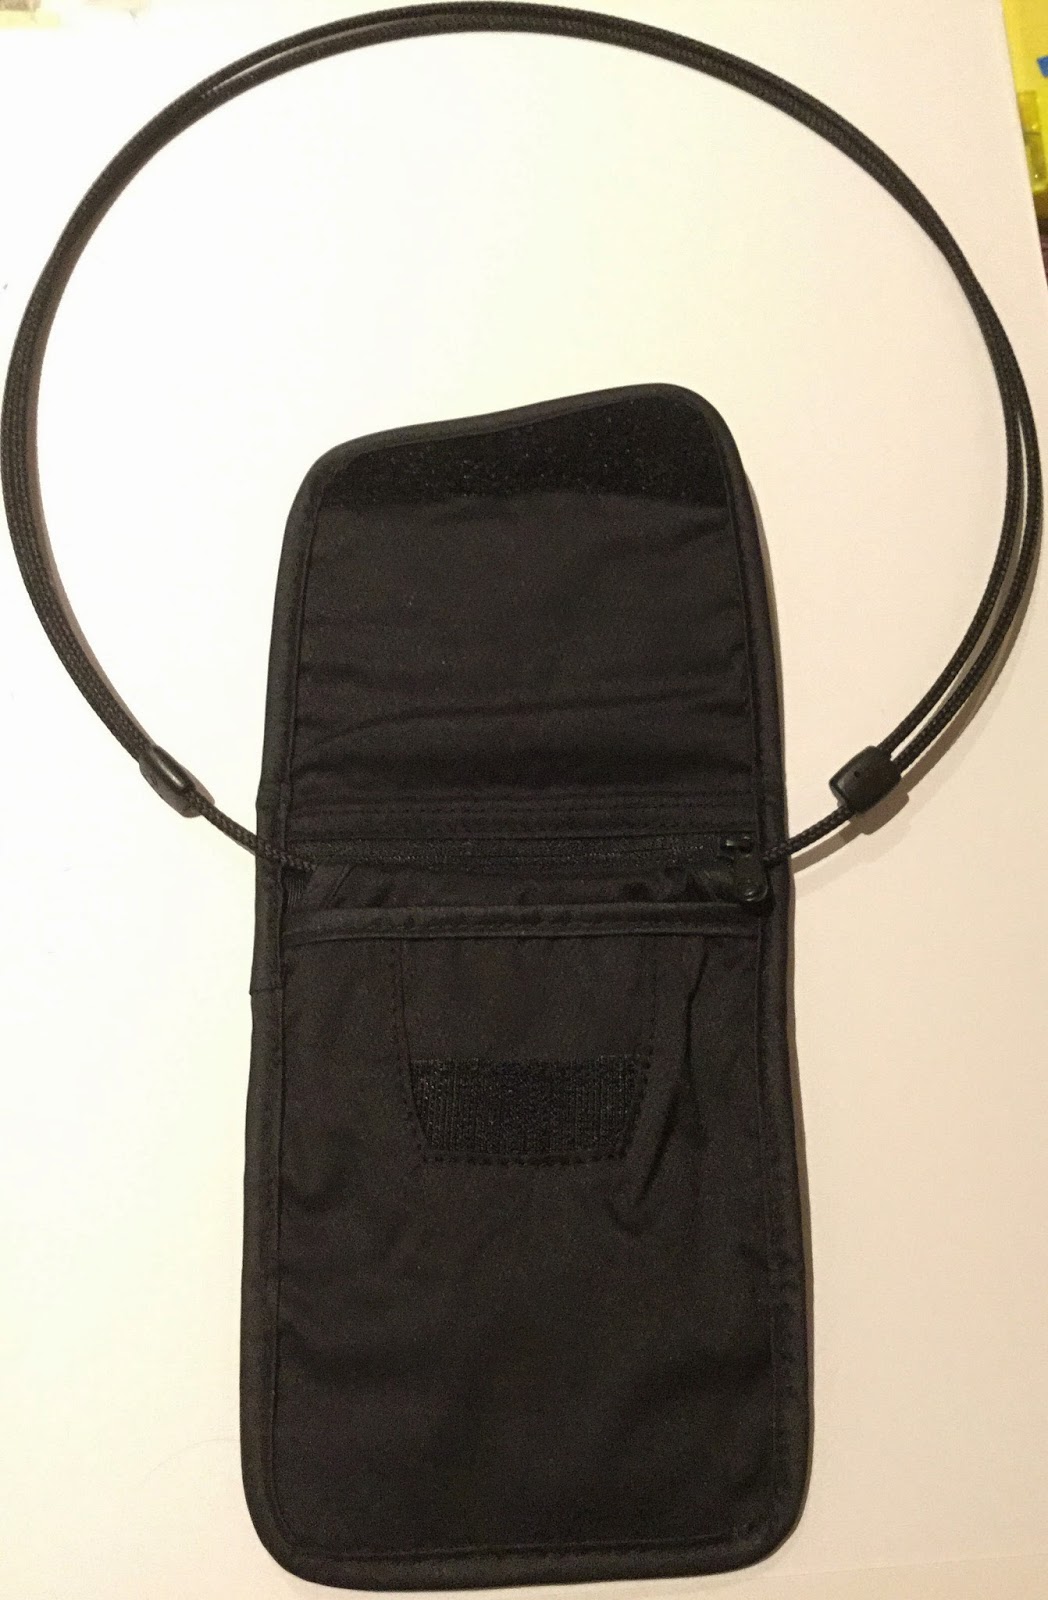 Joyce Leong: Review of Pacsafe Pick-pocket proof bags